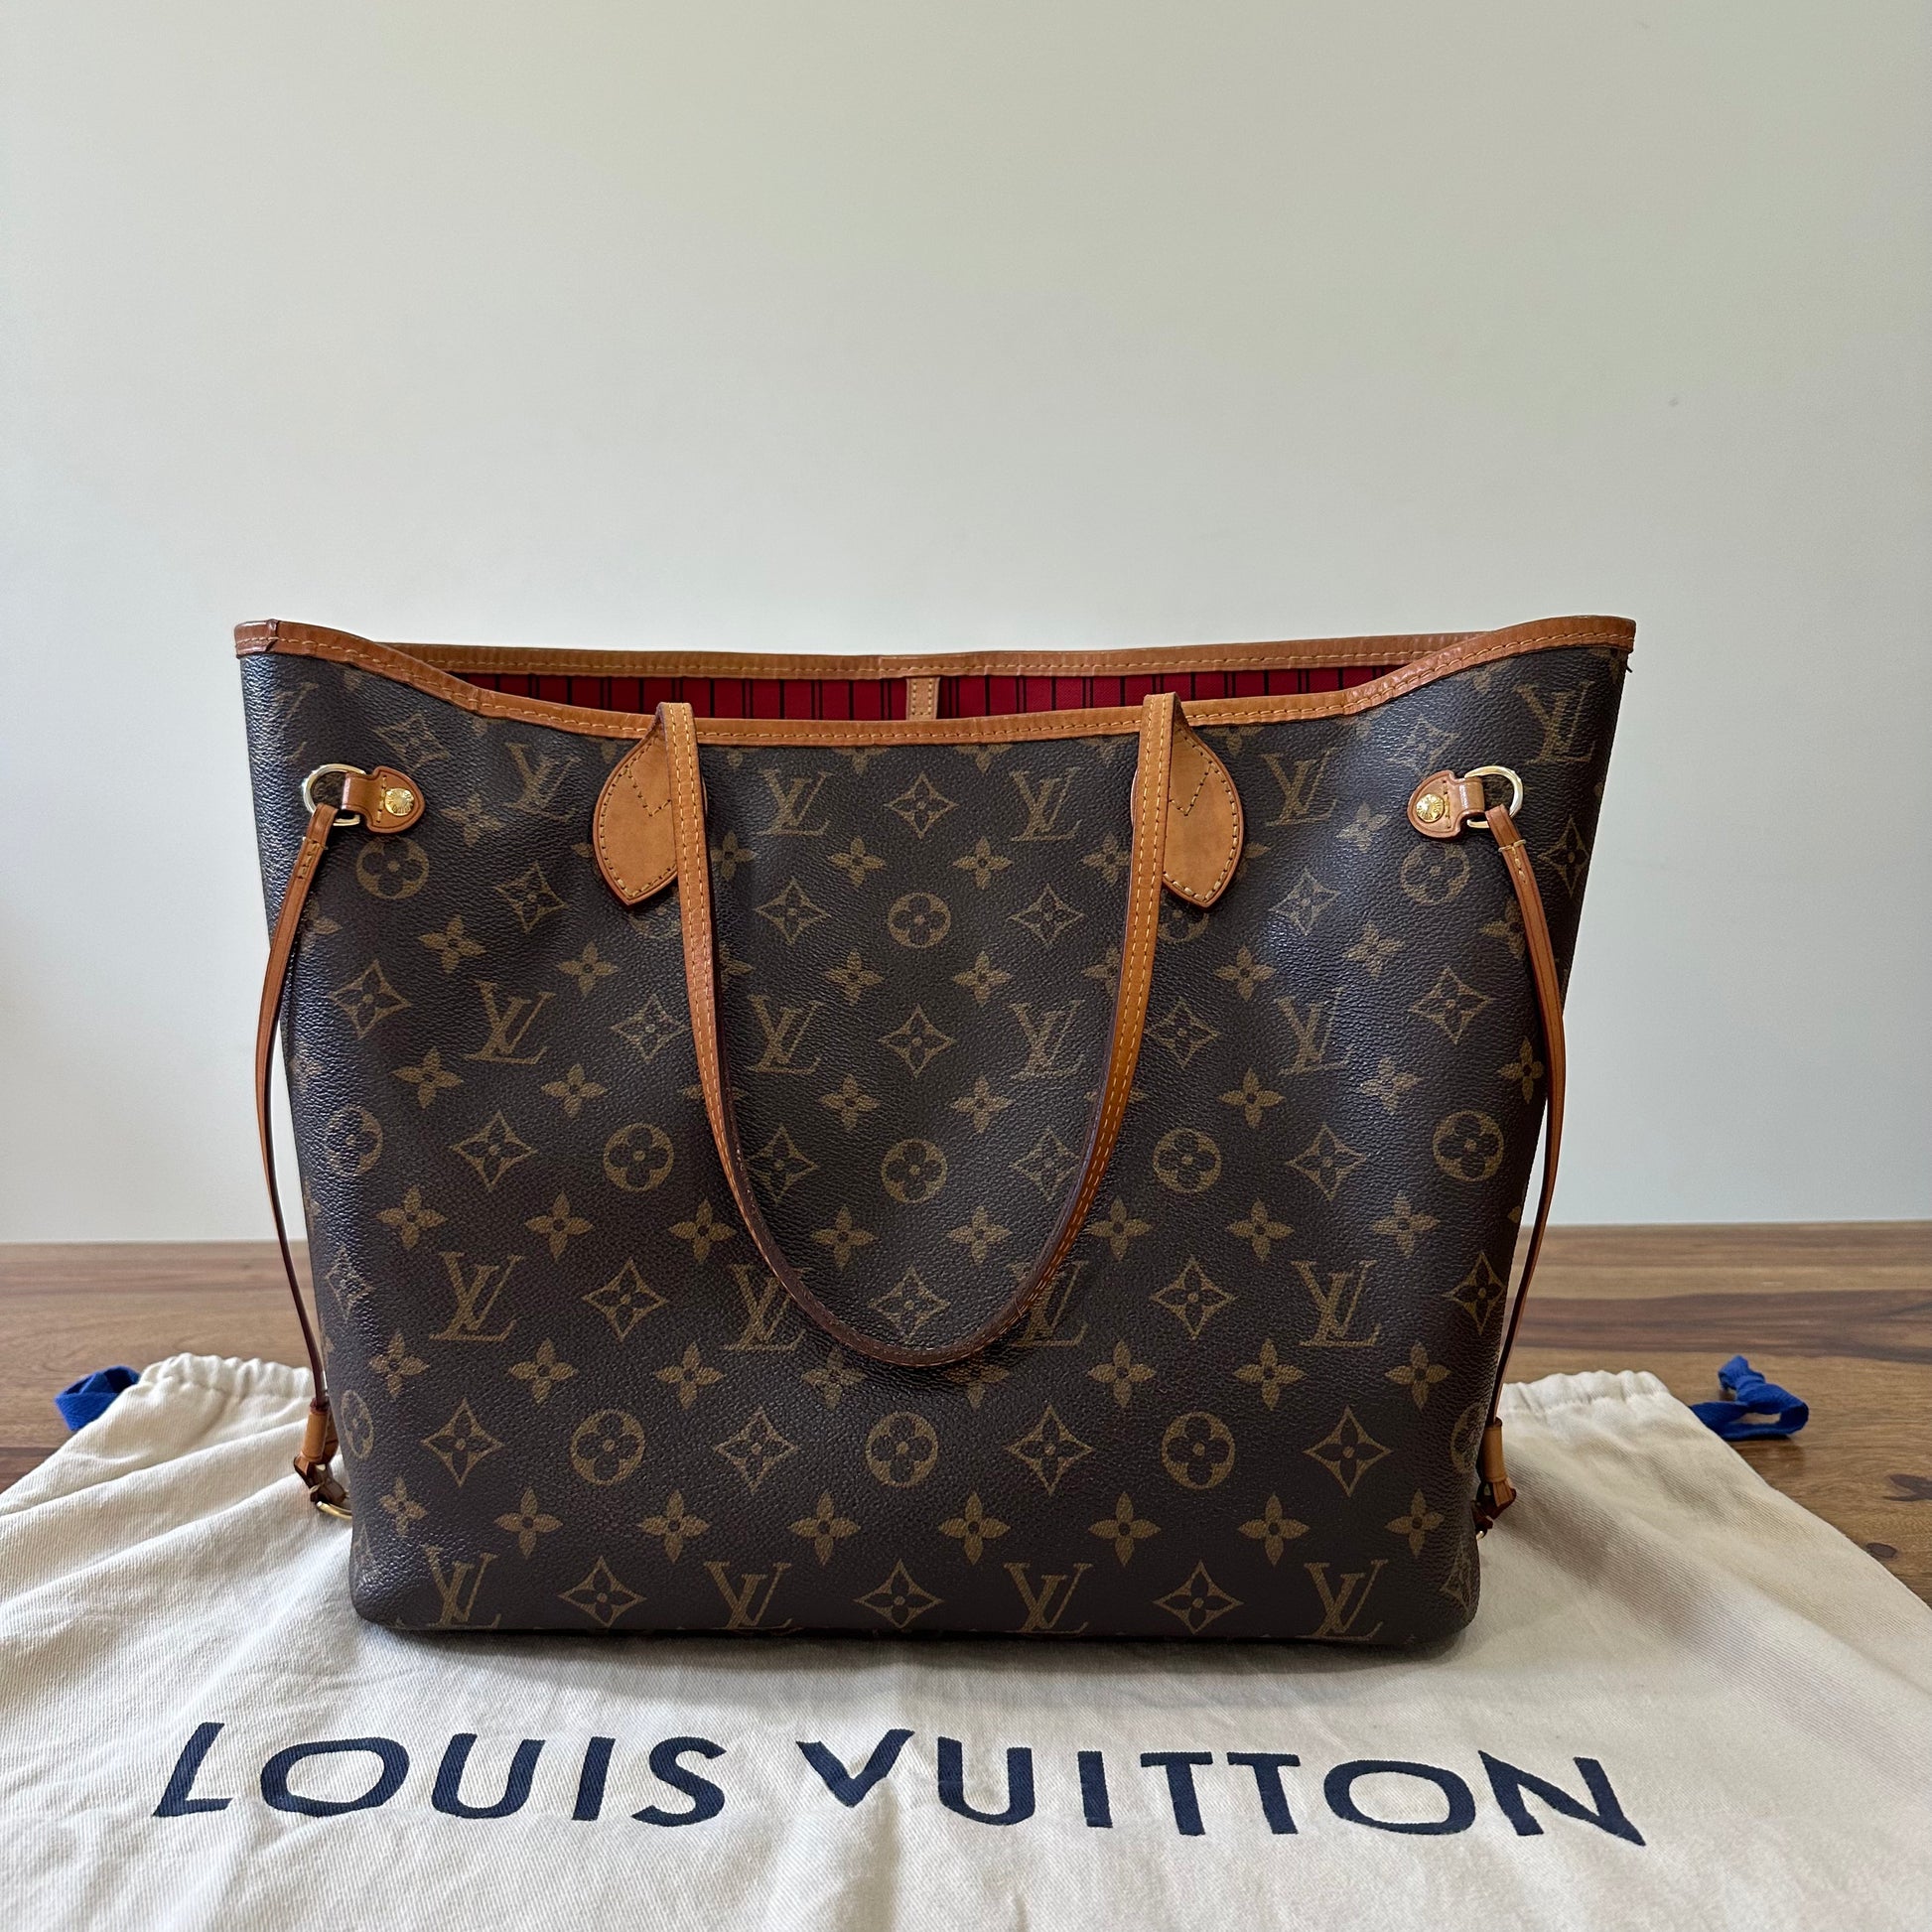 neverfull by louis vuitton